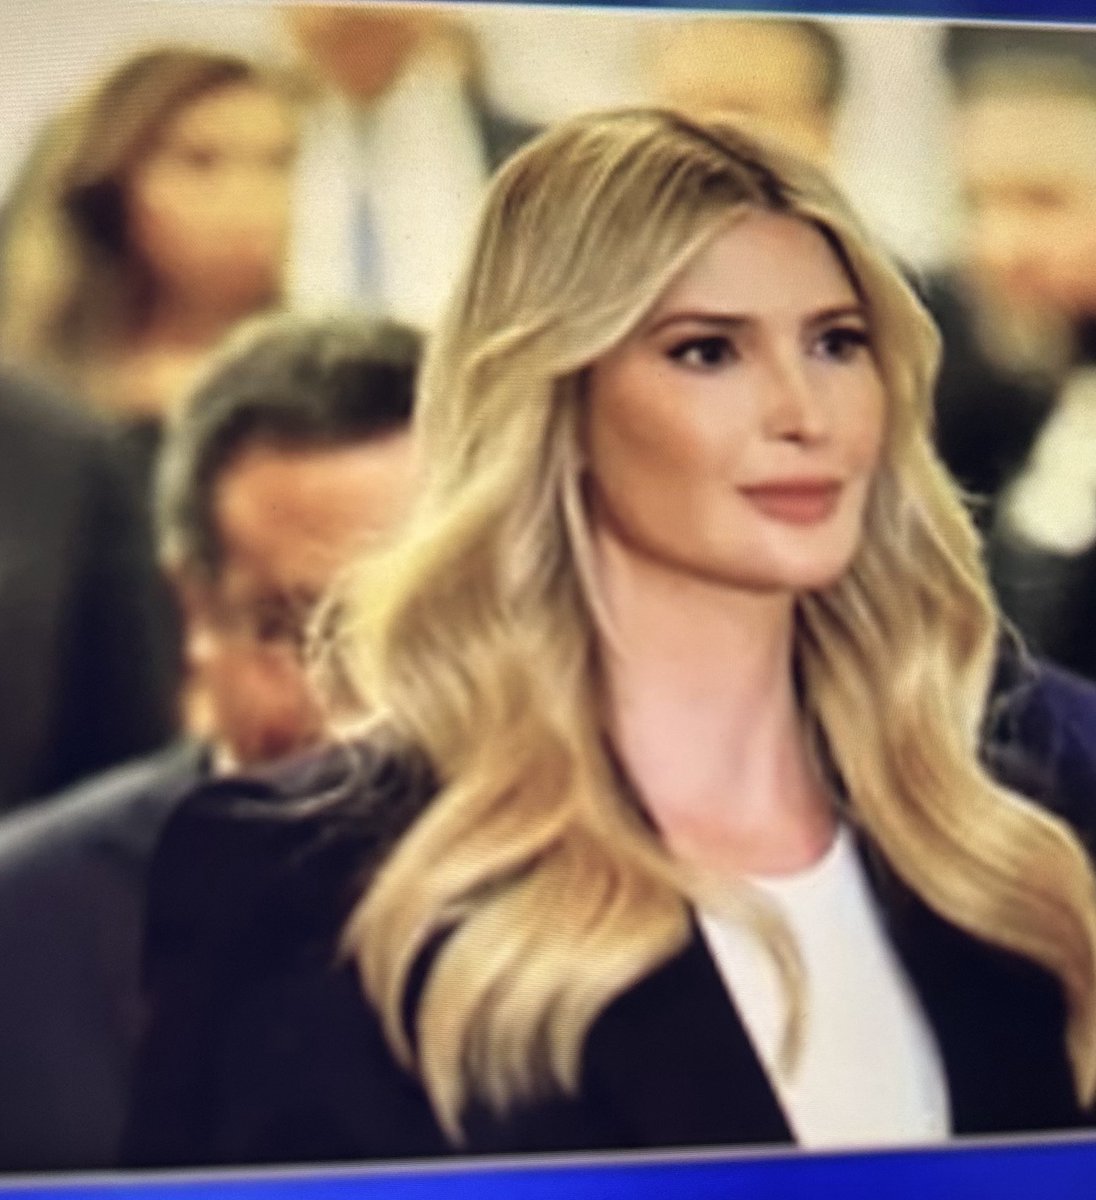 Did the Saudis buy #IvankaTrump, Hitler’s daughter wife a chin or did she slide it into sheets and shit for Trump hotel in DC? She looks like a Kartrashian, filled with plastic and bile — very on brand.